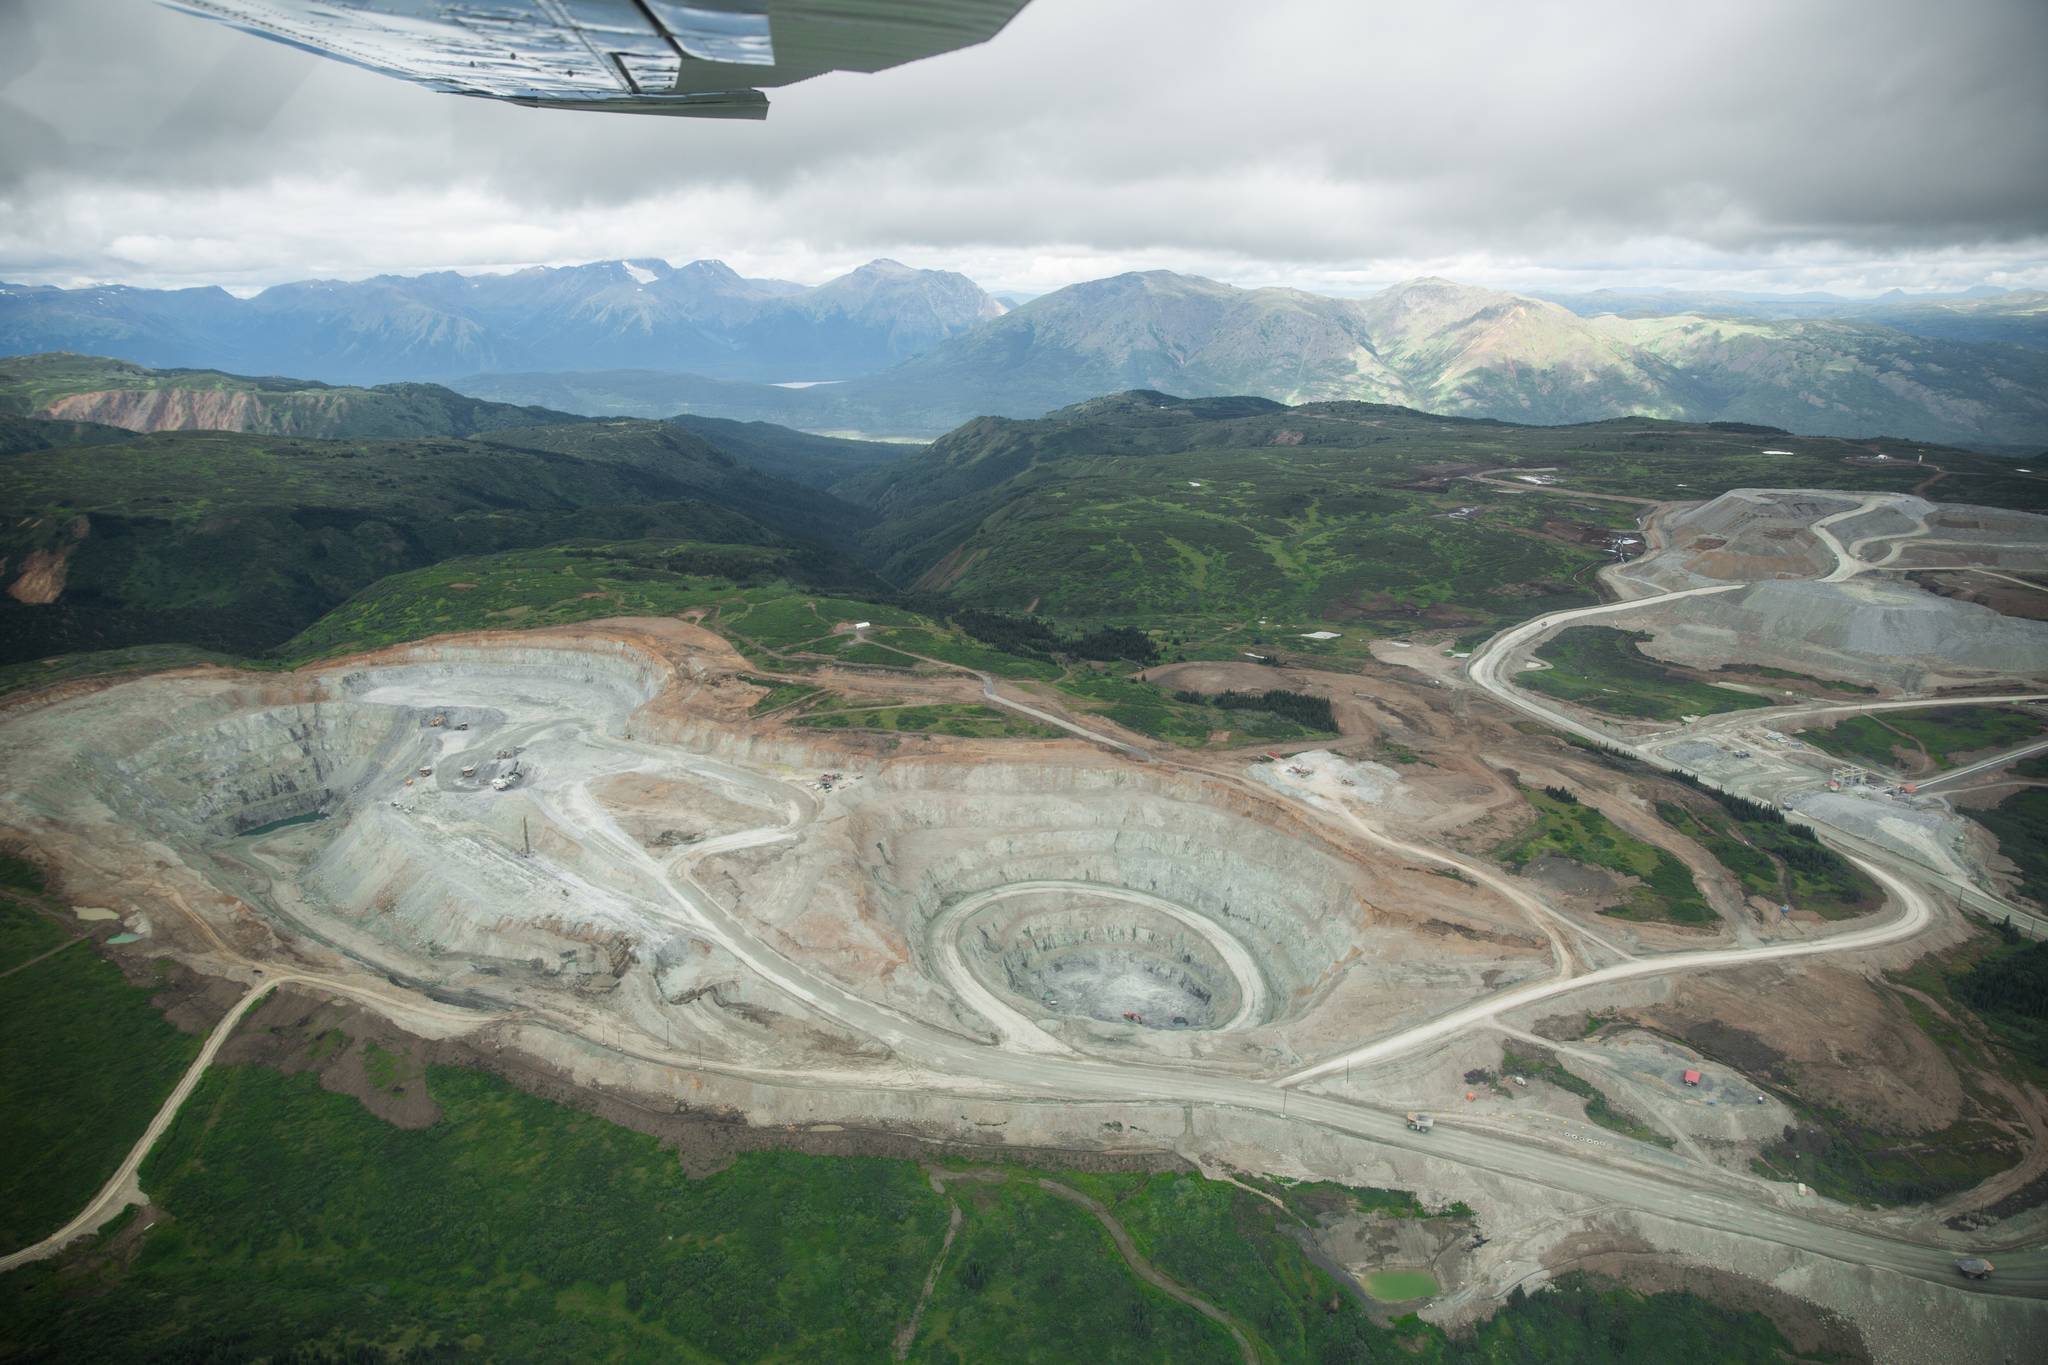 The Red Chris Mine in the transboundary Stikine-Iskut River watershed. Mines like this one are a source of consternation for conservationists, who say mining activity north of the border has negative repercussions for Alaskans. (Tyler Wilkinson-Ray | Courtesy of Salmon Beyond Borders)